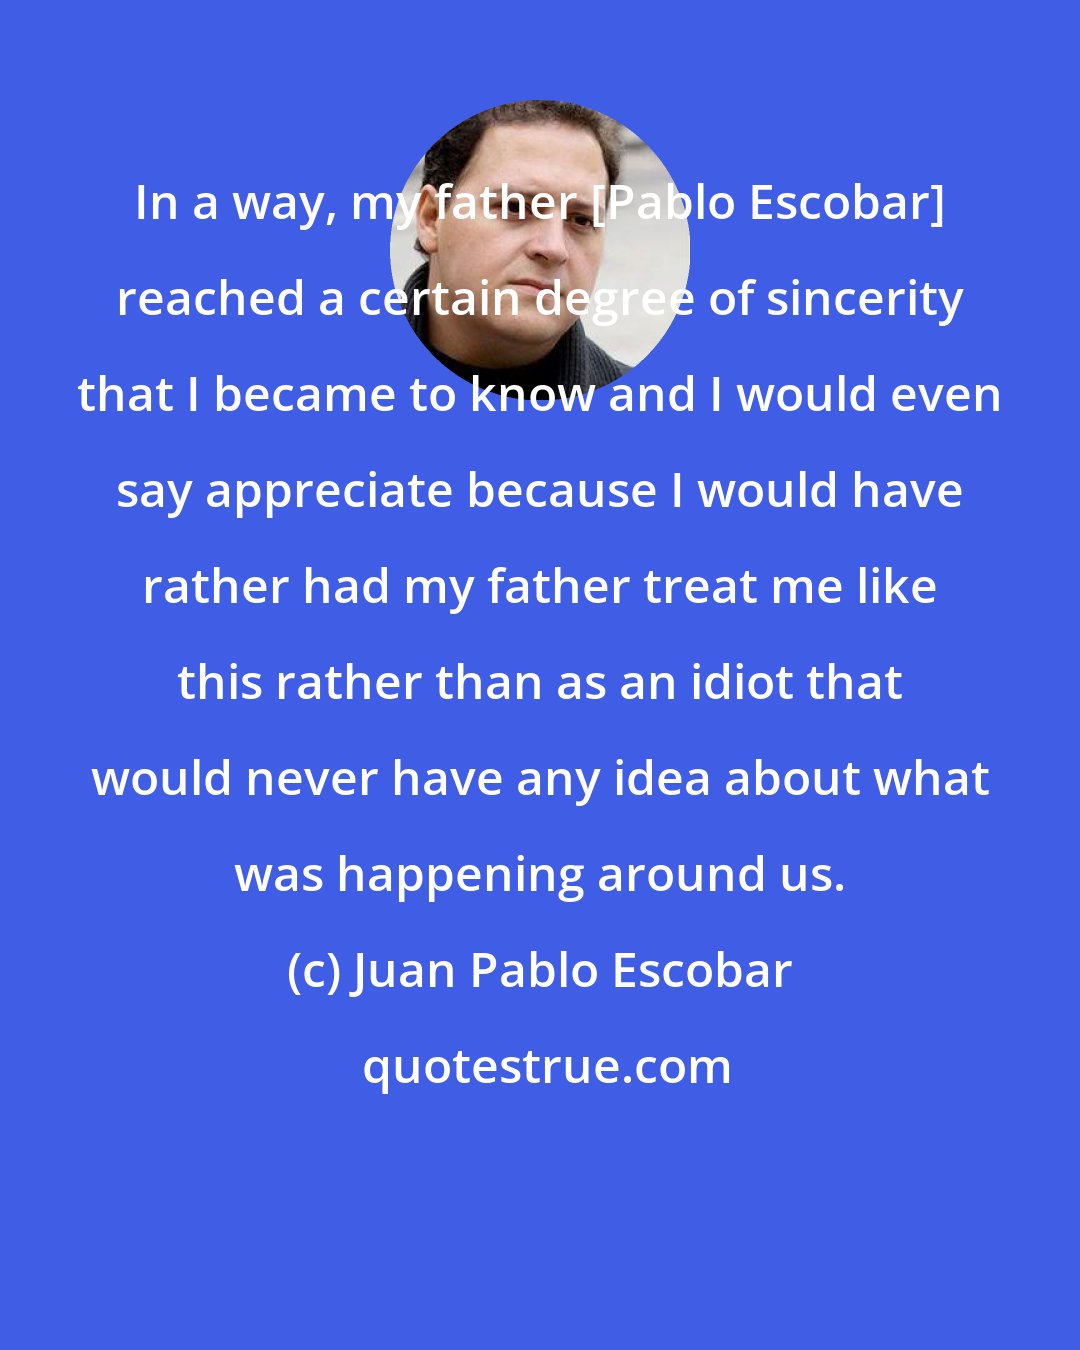 Juan Pablo Escobar: In a way, my father [Pablo Escobar] reached a certain degree of sincerity that I became to know and I would even say appreciate because I would have rather had my father treat me like this rather than as an idiot that would never have any idea about what was happening around us.